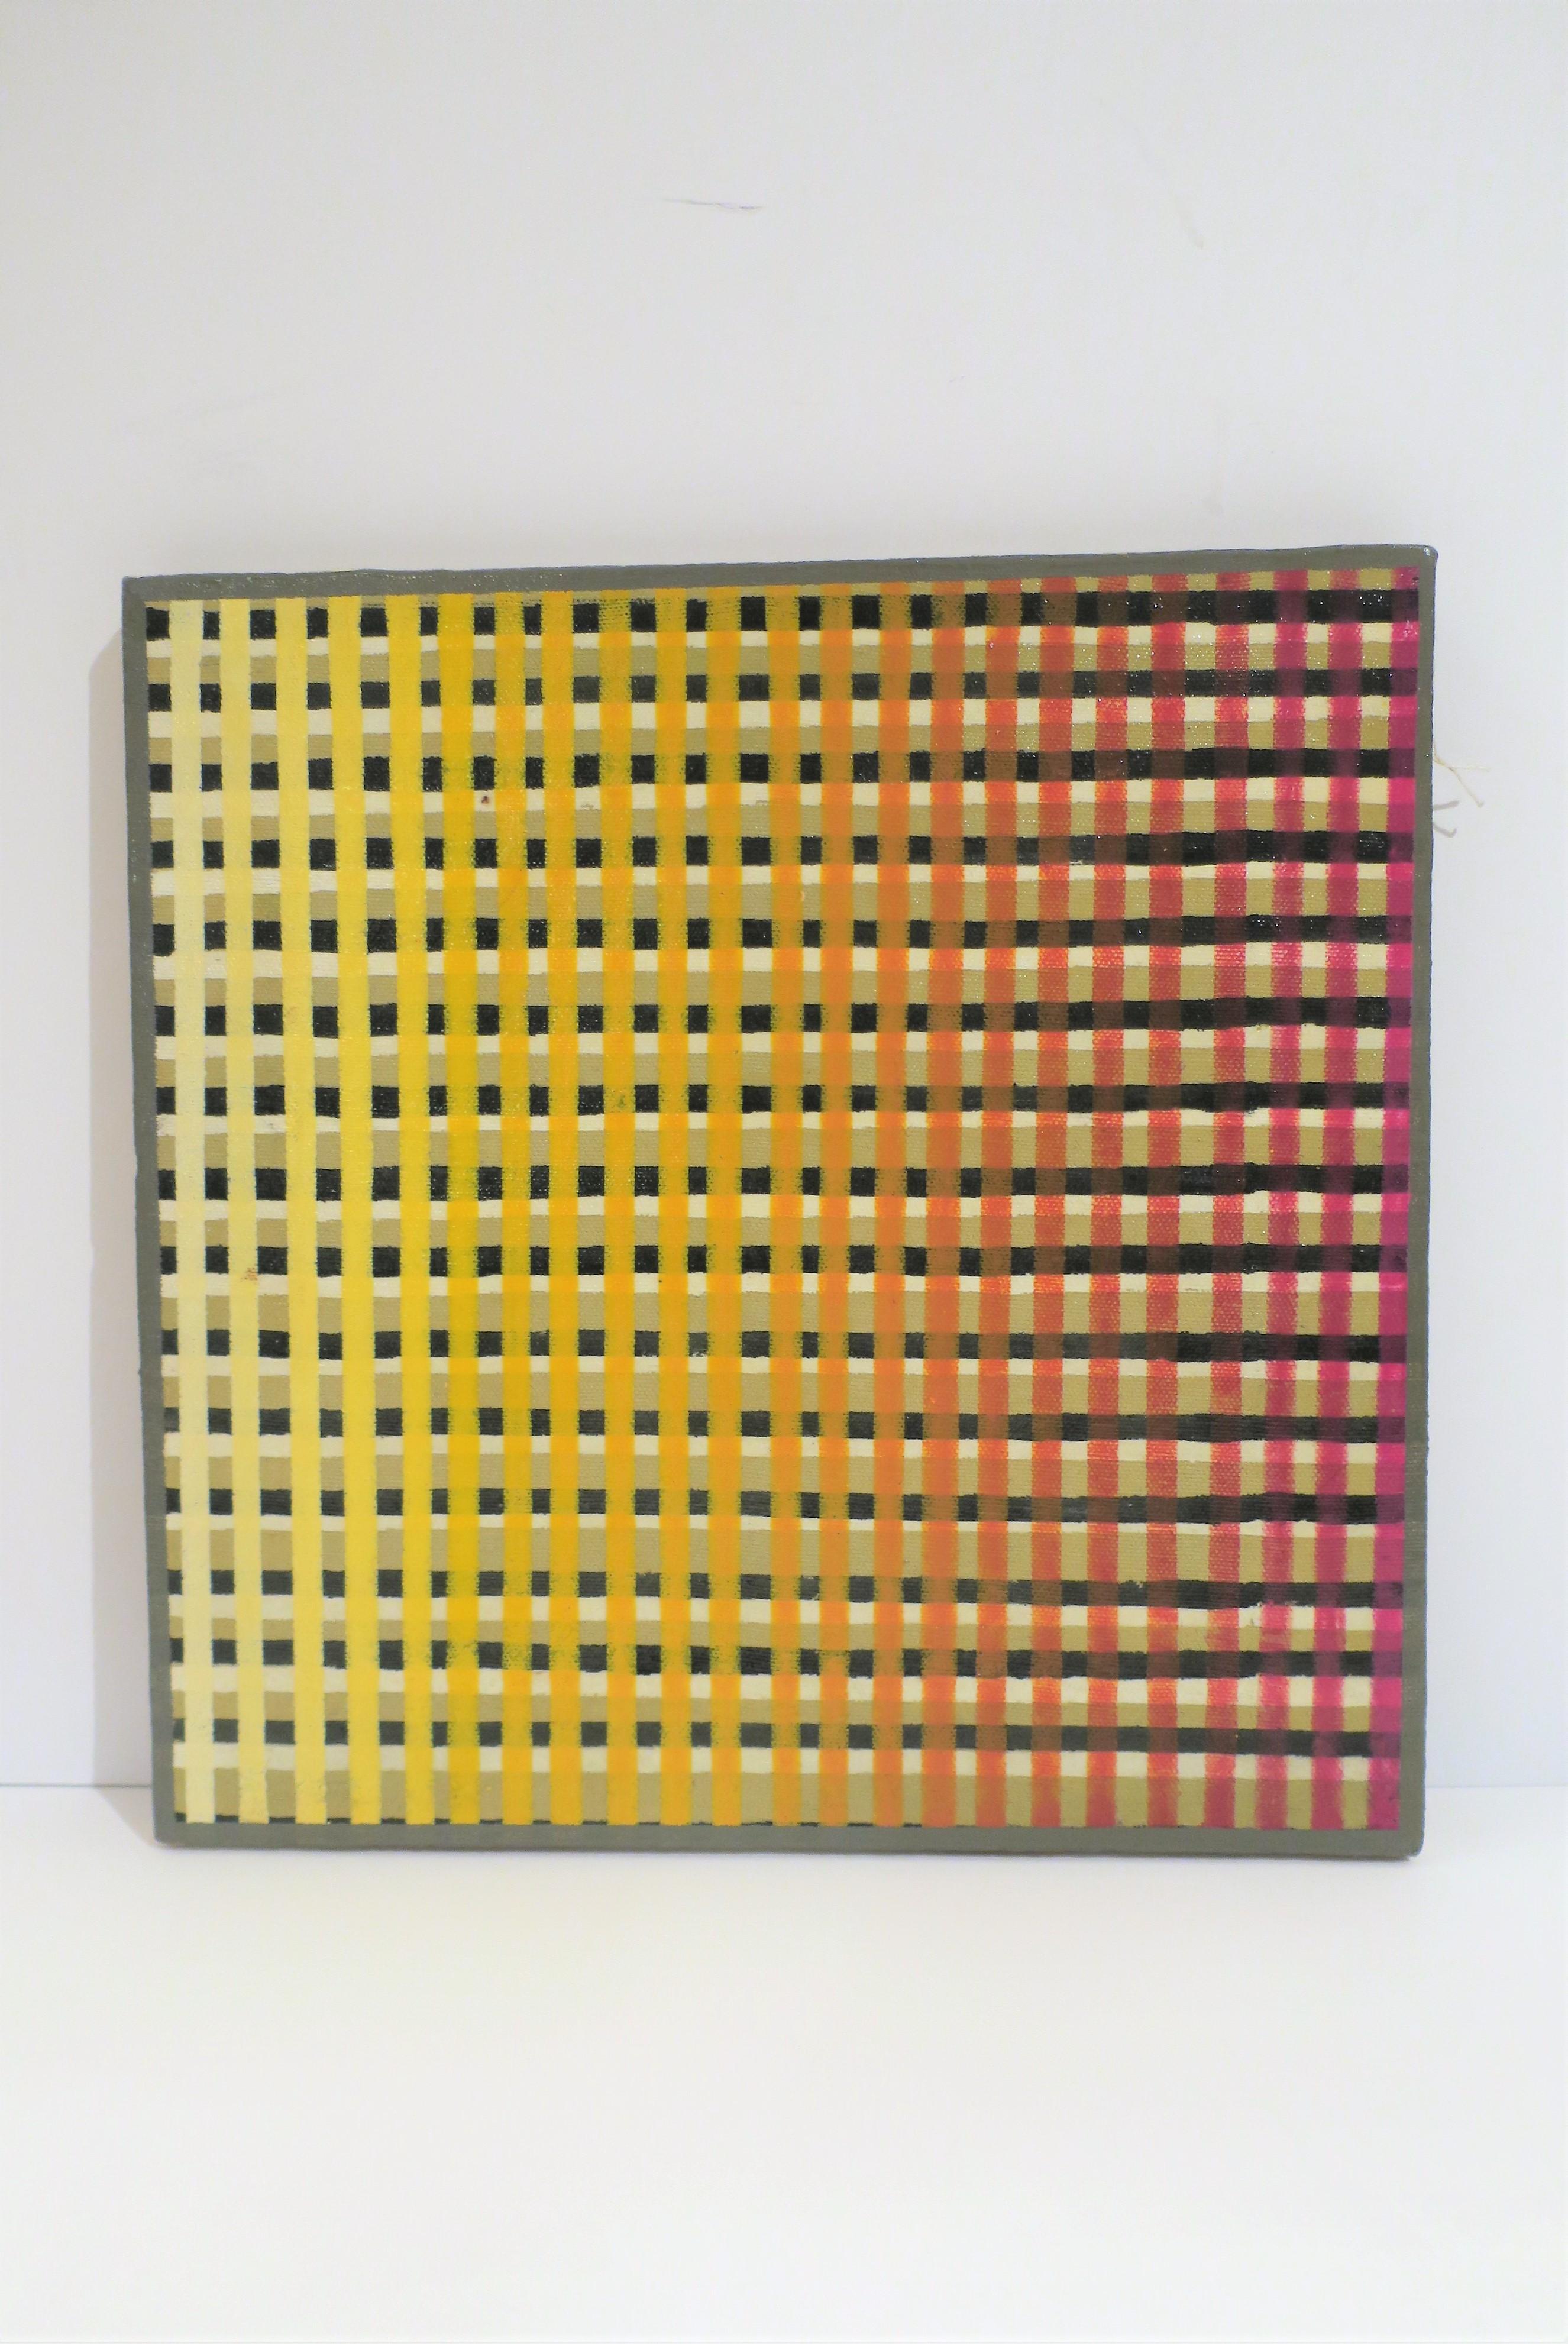 A small, beautiful, oil or acrylic paint on canvas, a study, 'chromatic quadrant', by artist Chris Willard, 1993, New York. Canvas is hand-stretched over custom sized wood frame. Colors include: Yellow to orange to magenta, with white and black